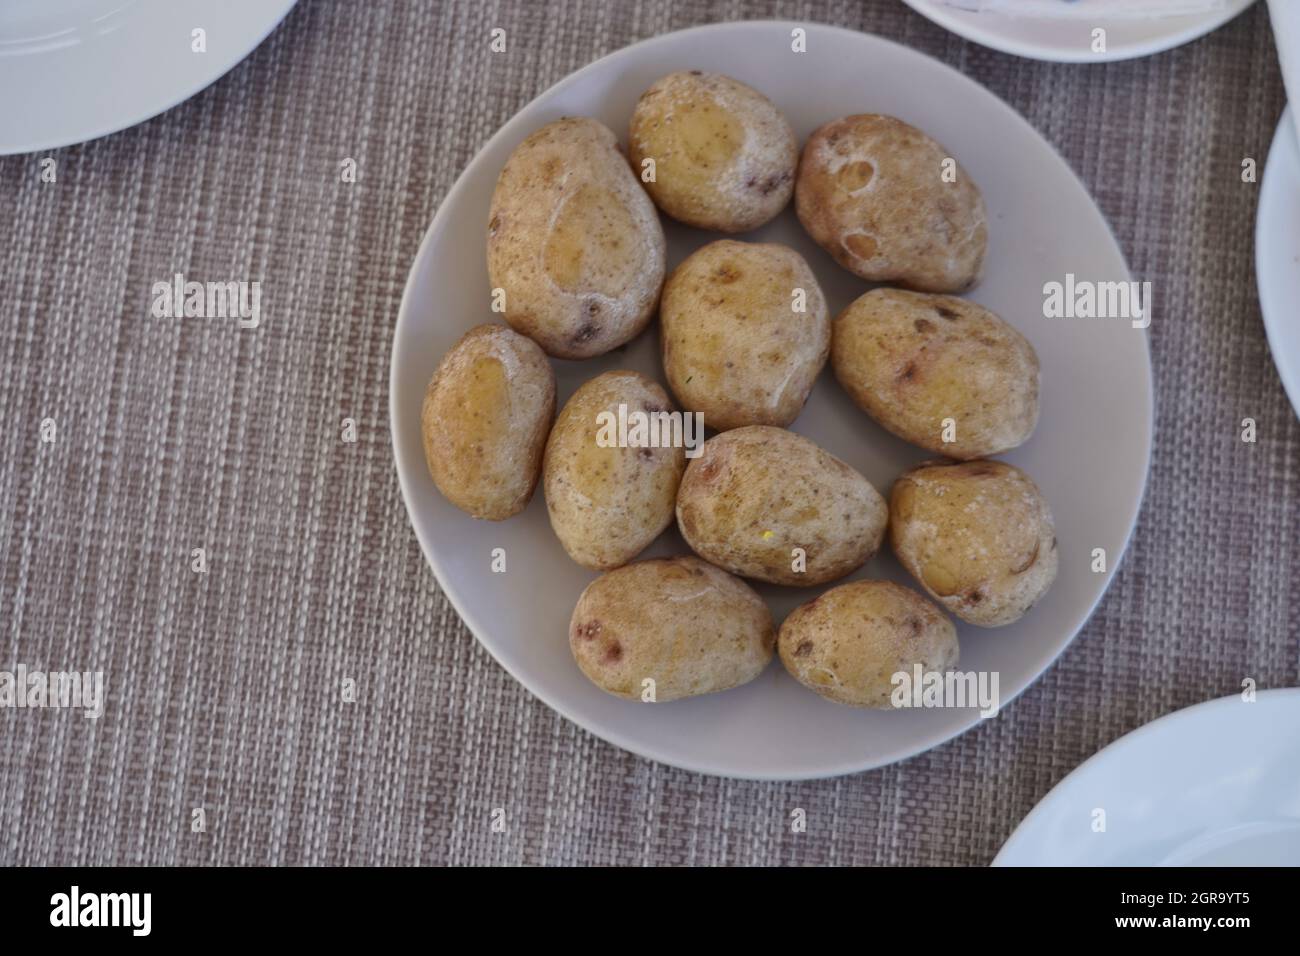 Cooked Potatoes Served On Plate Stock Photo